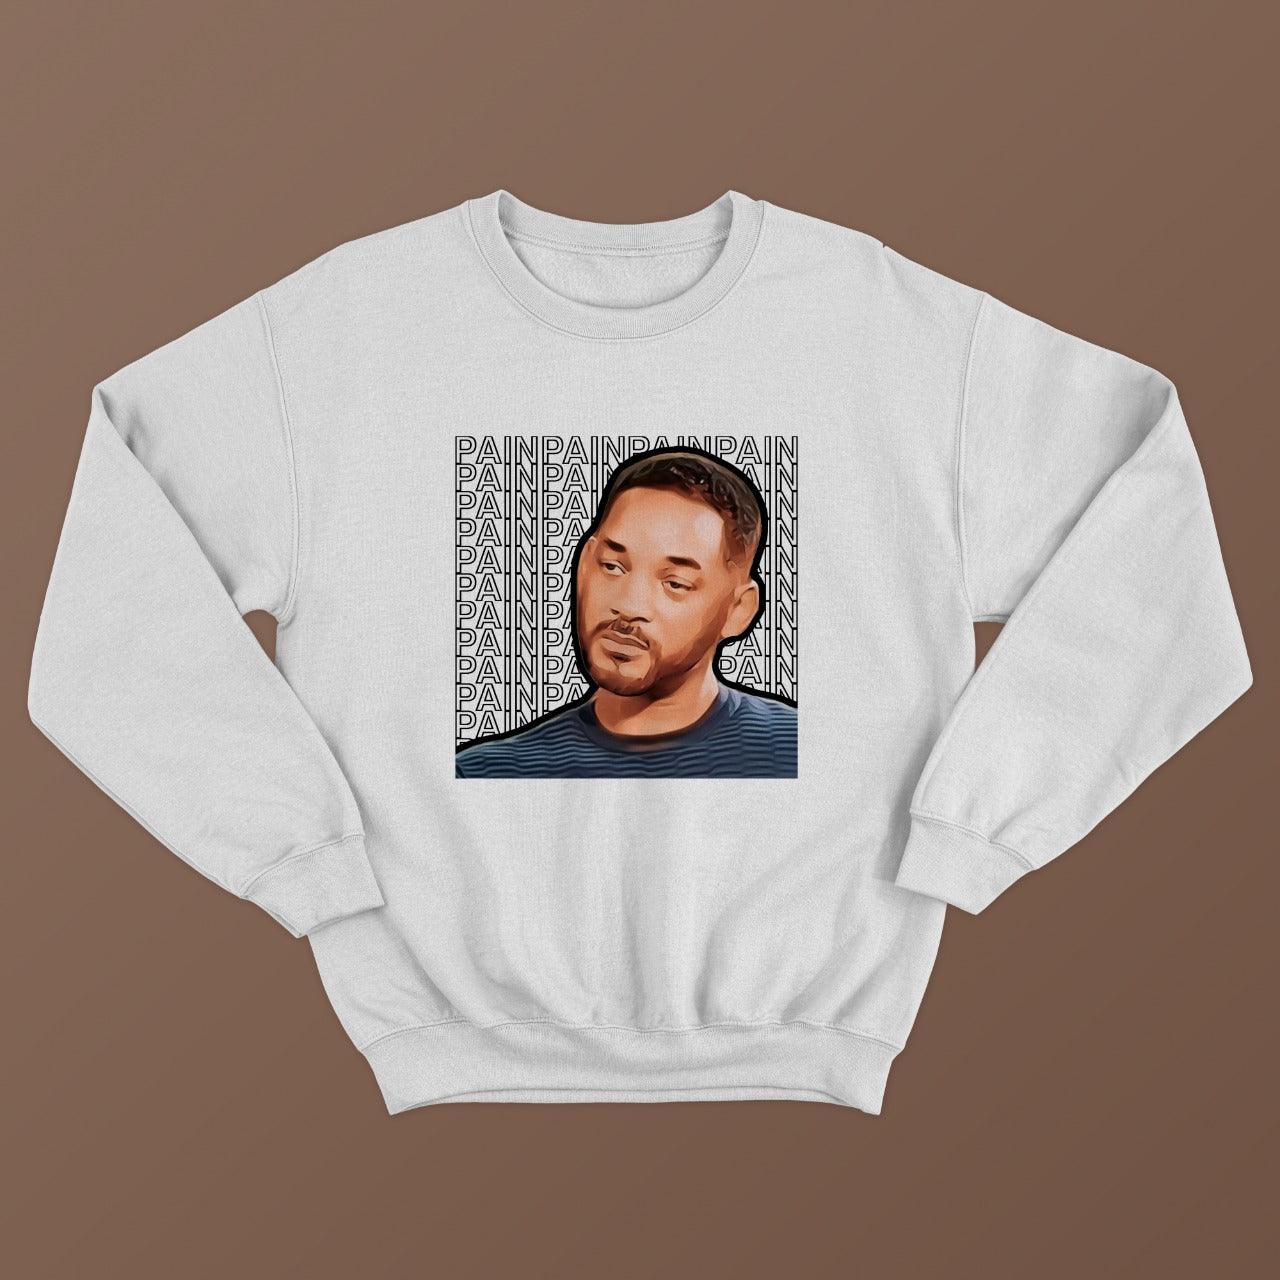 white sweatshirt with picture of sad will smith printed on it with pain written multiple times in the background, relatable memes